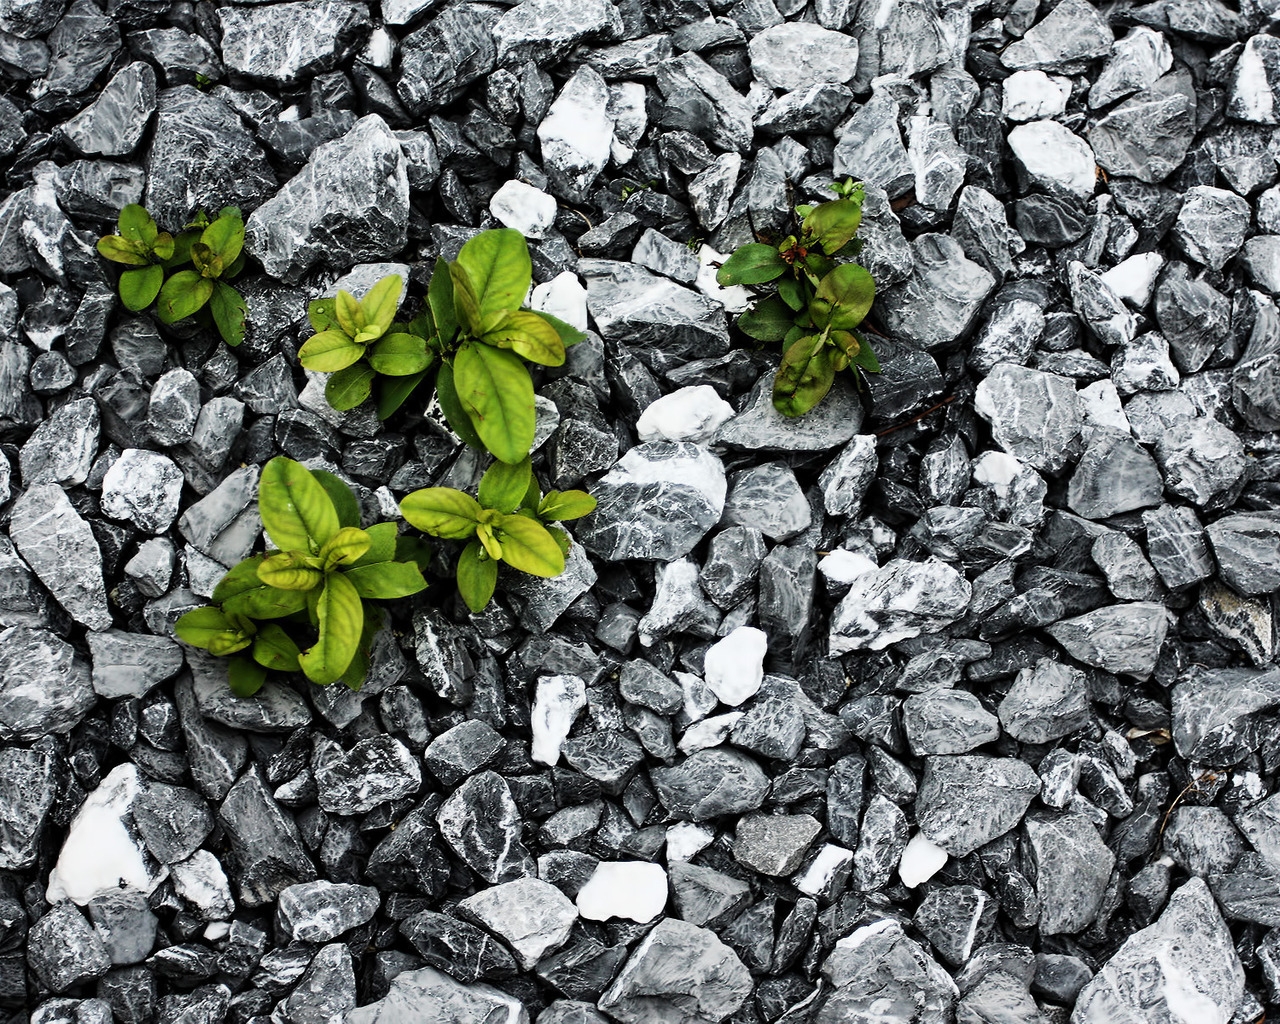 Plants between the stones for 1280 x 1024 resolution